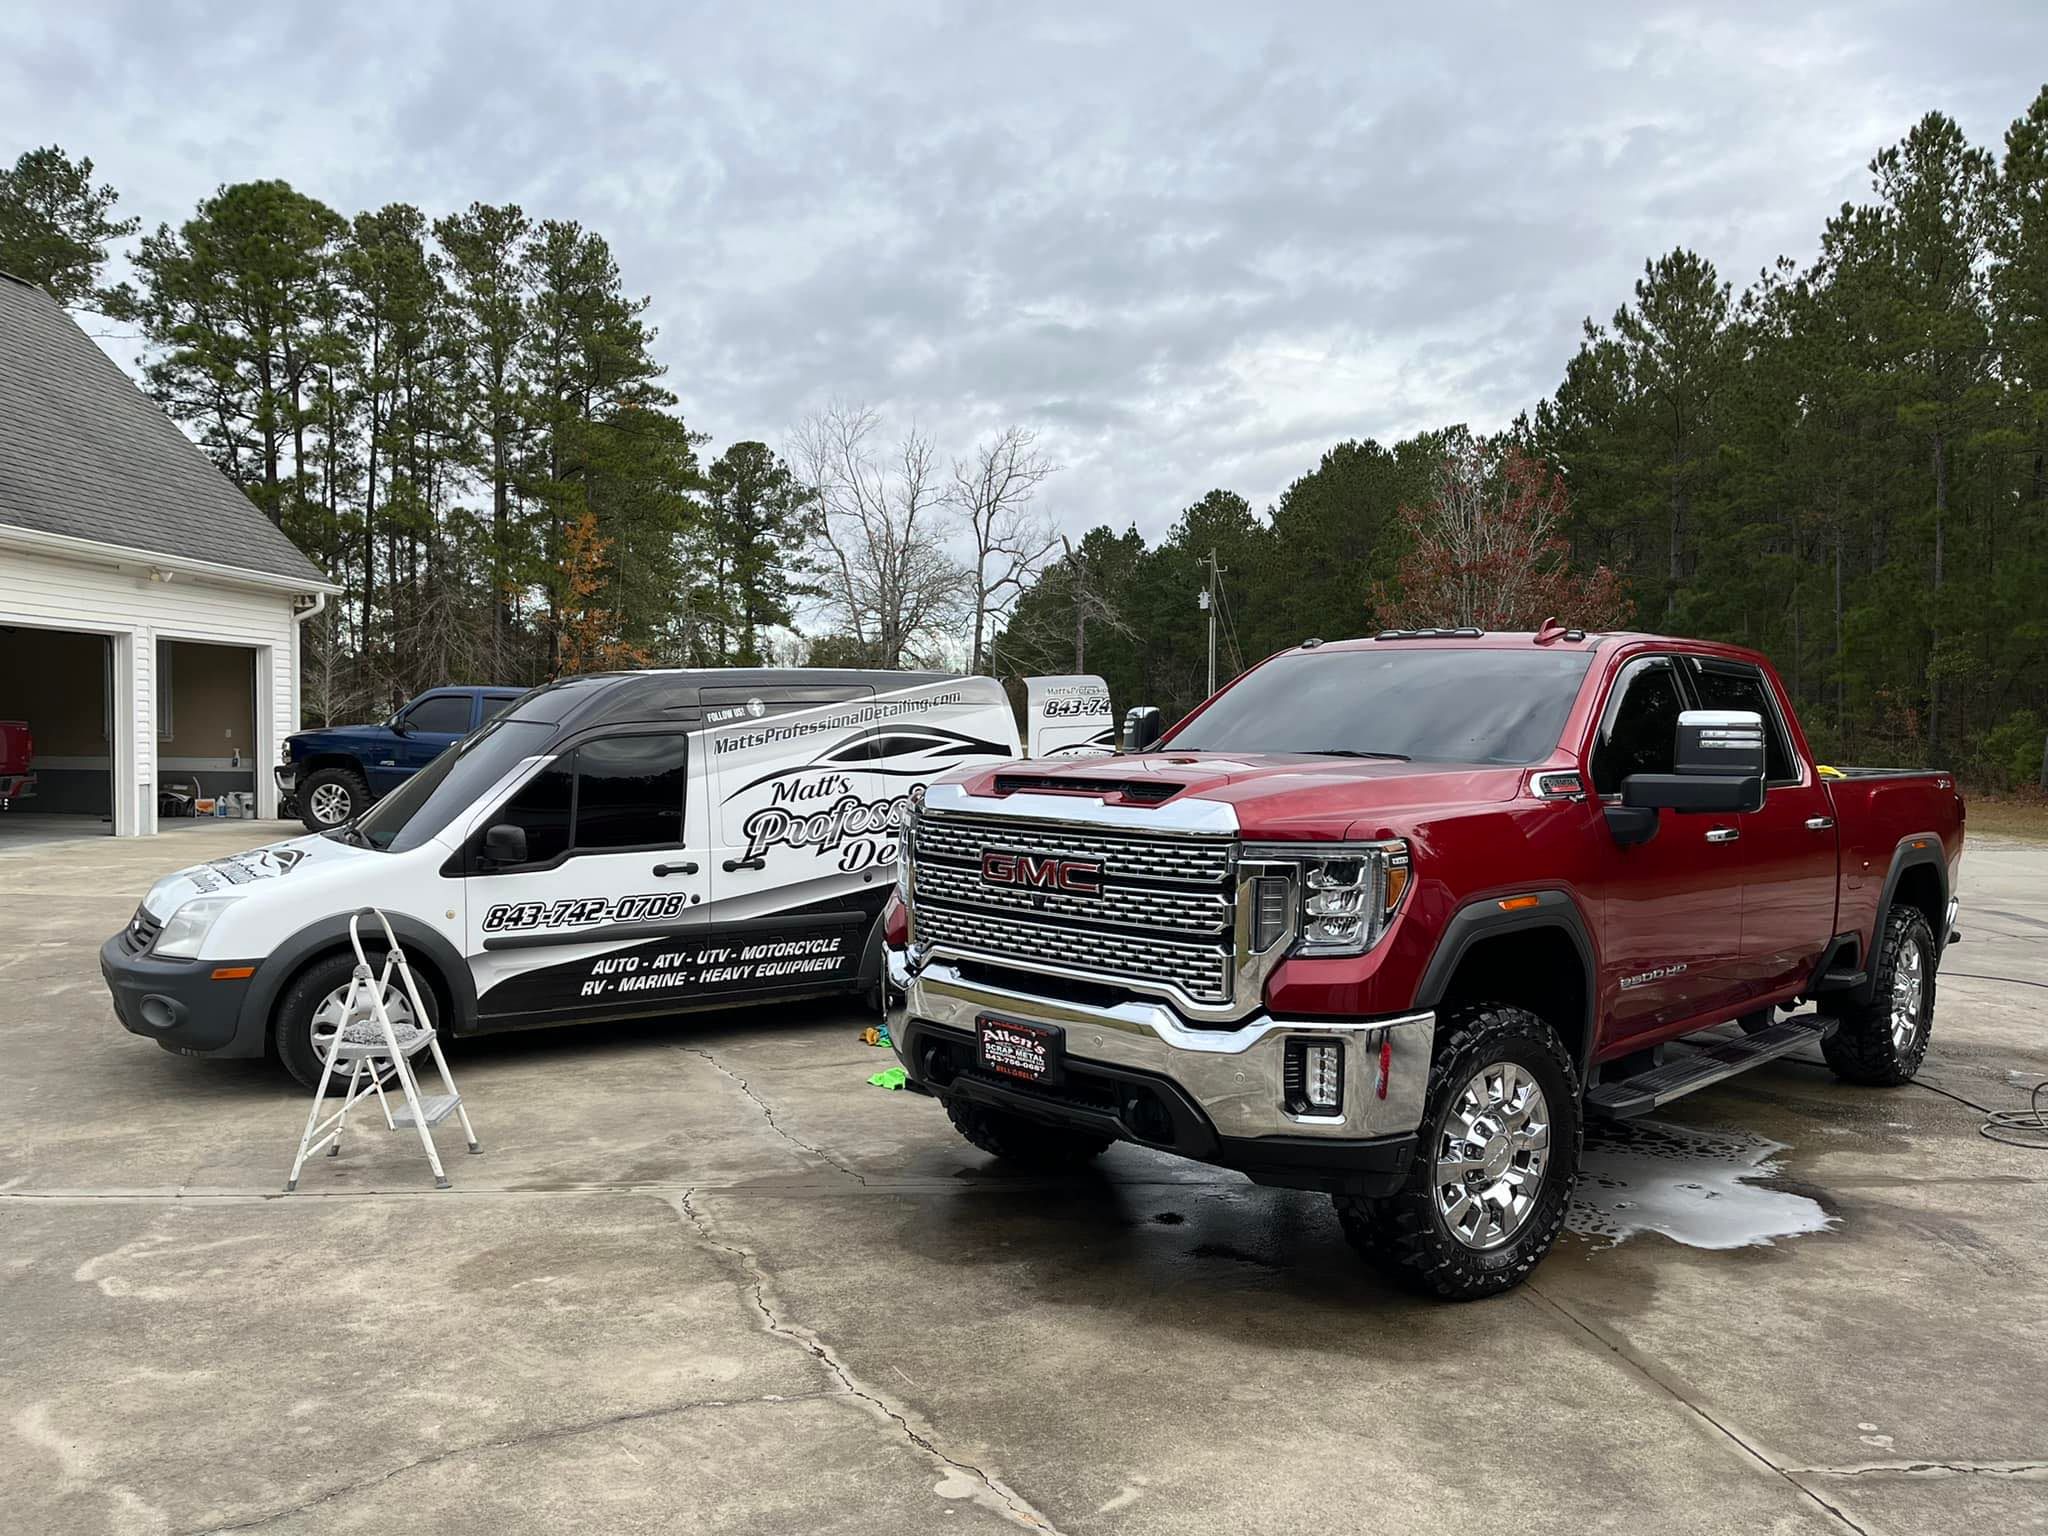 All Photos for Matt's Professional Detailing in Horry County, SC